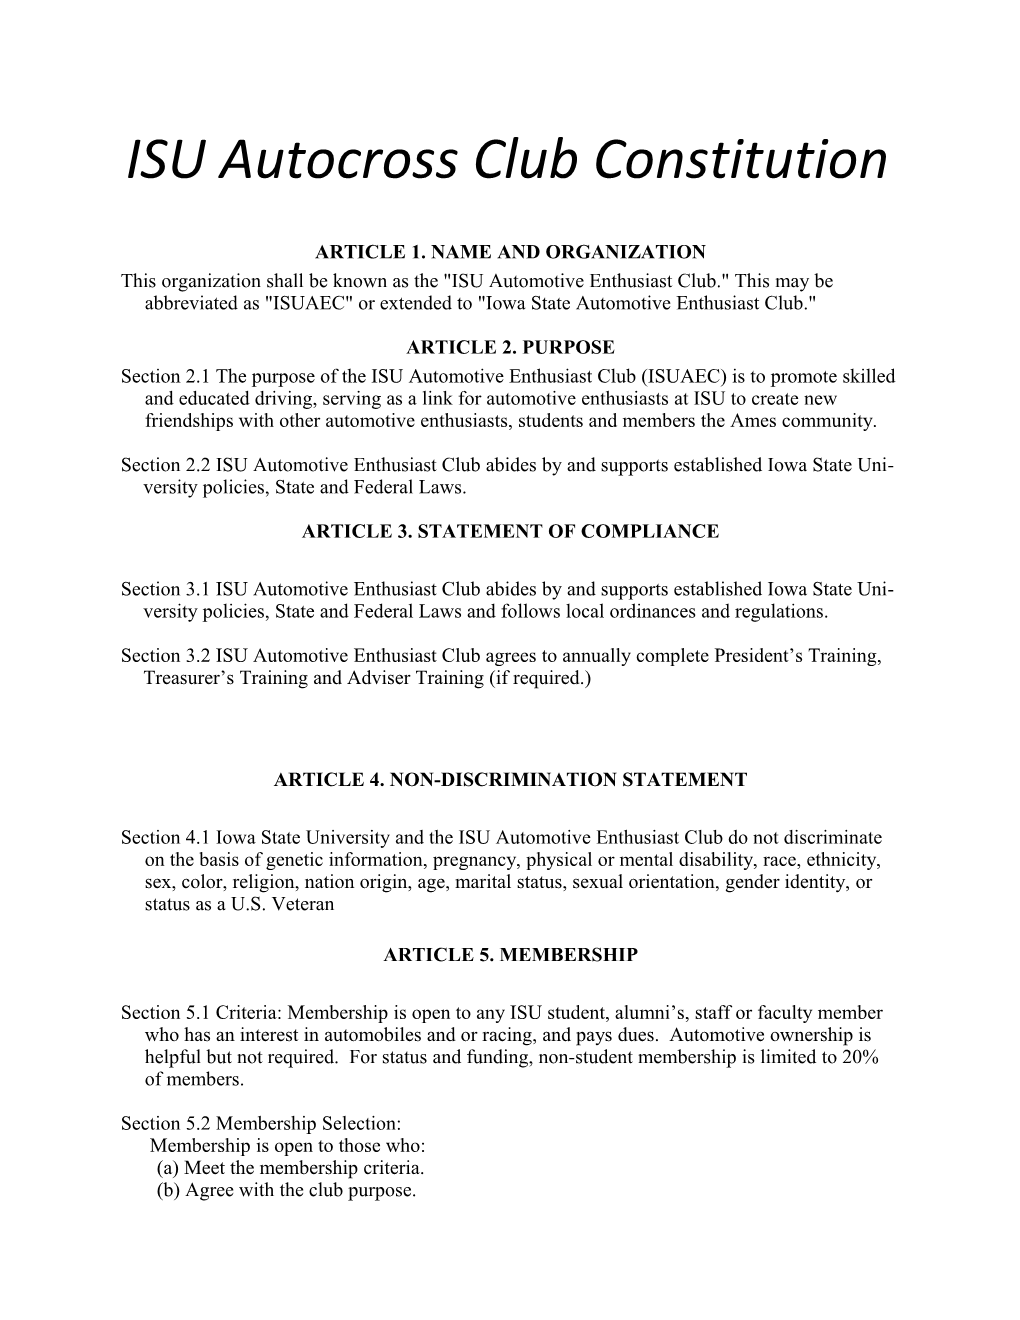 Bylaws for the KU Motorcycle Club s1